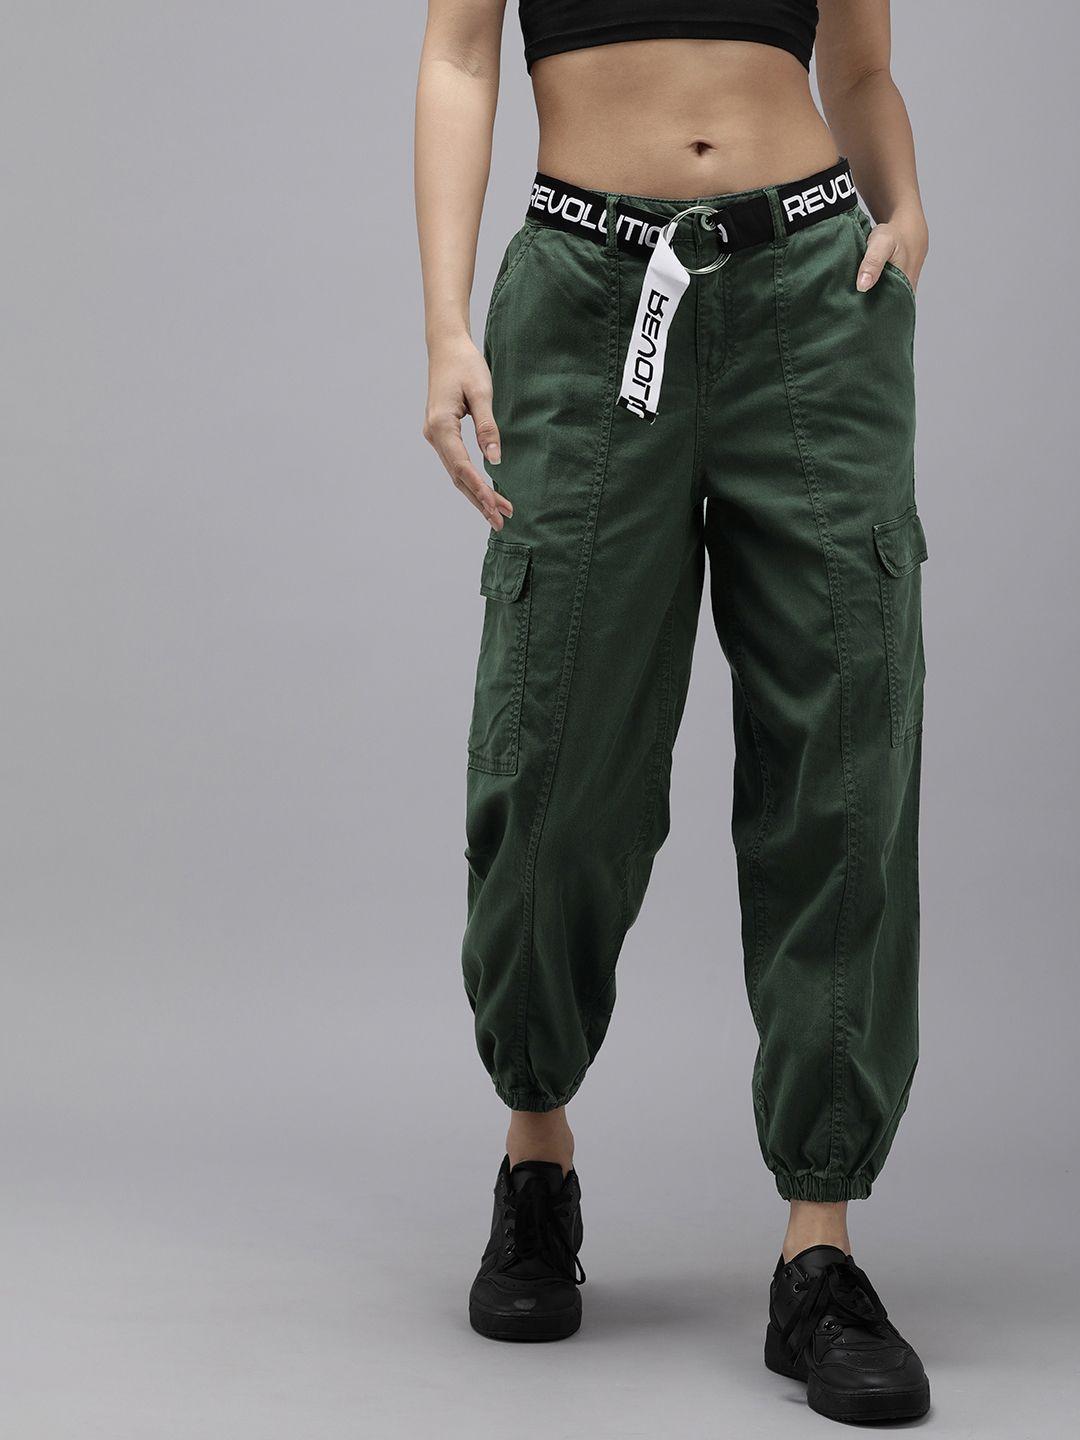 the roadster life co. women solid cargo style joggers